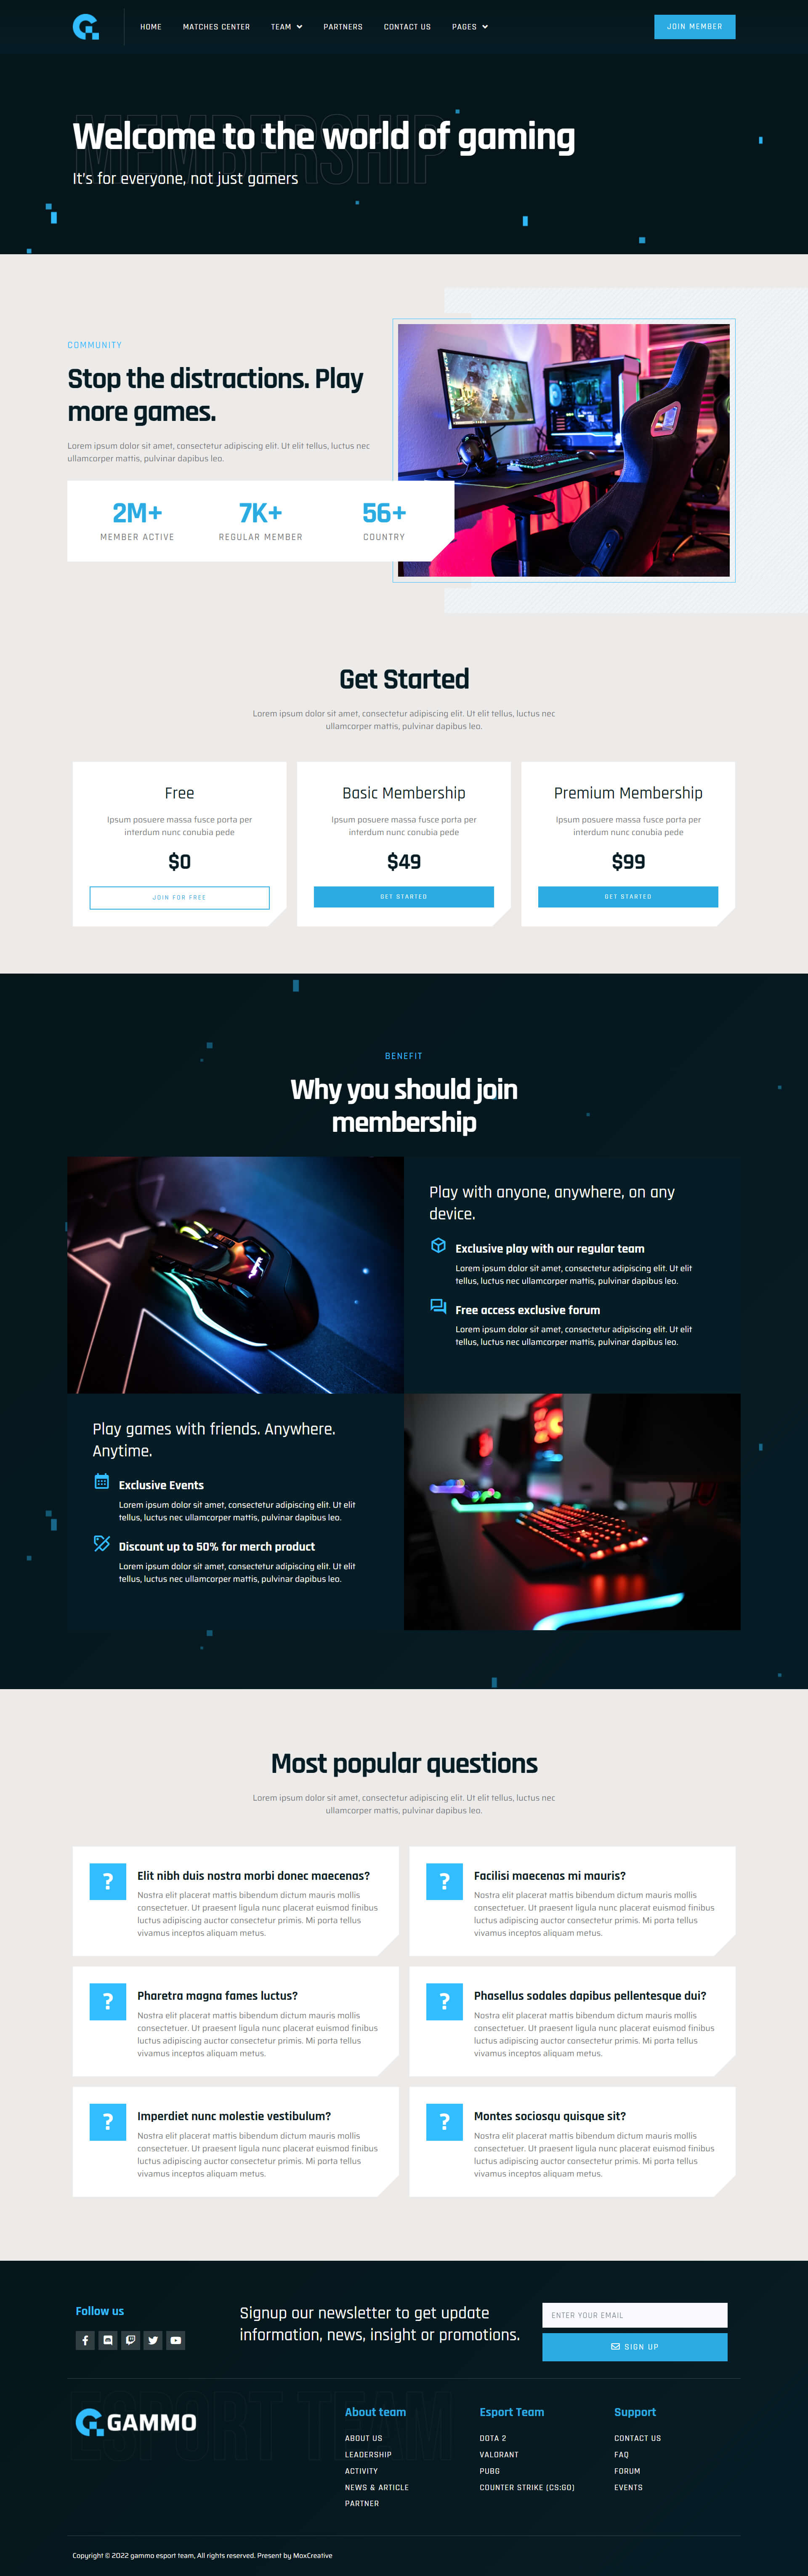 GameZone - Gaming Website Template For Elementor by sabbirmc for  WPDeveloper on Dribbble